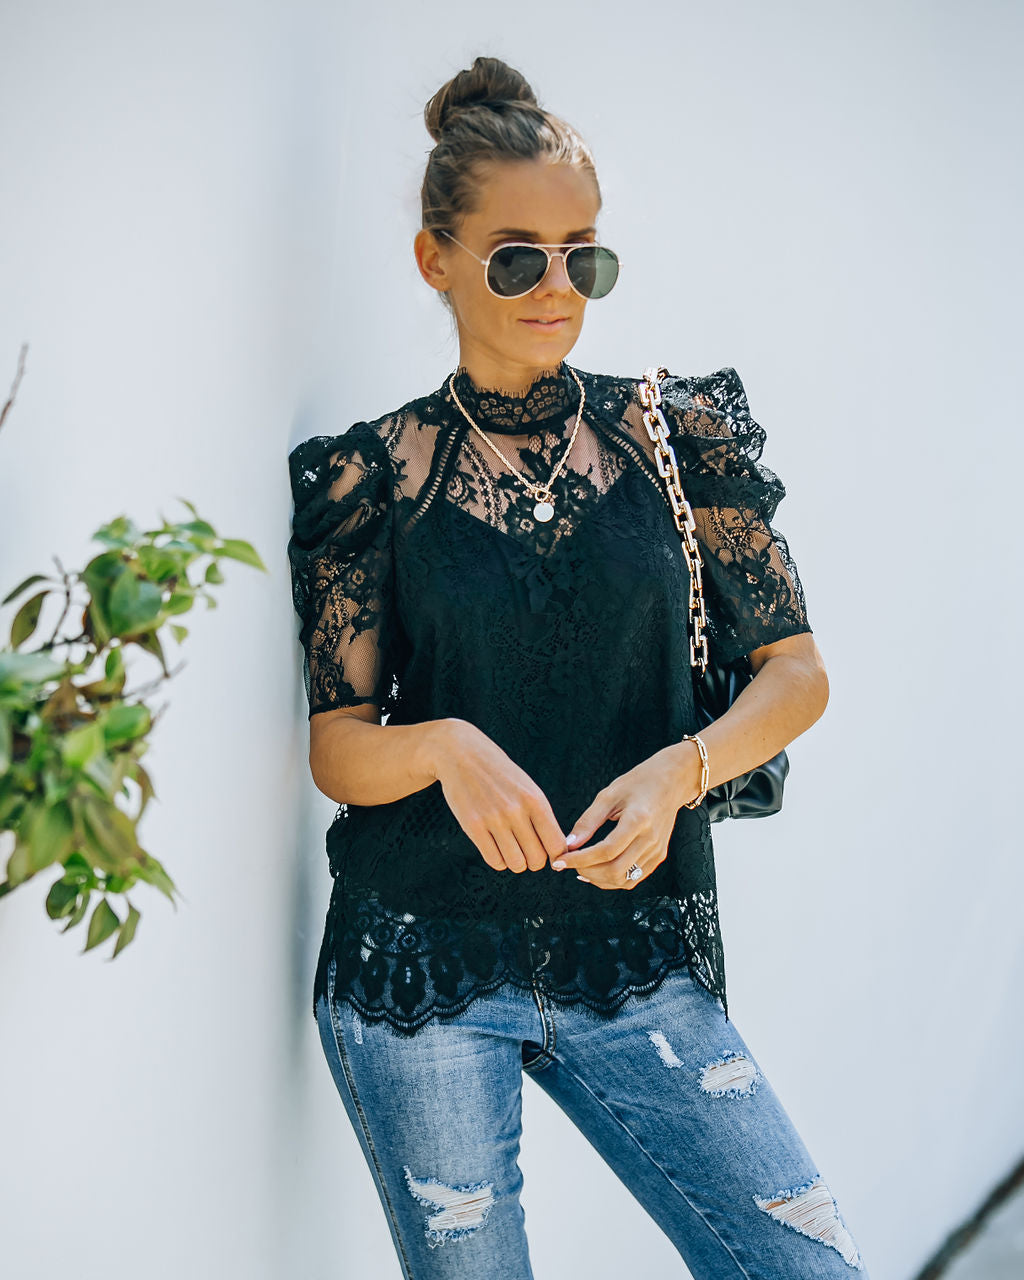 Songwriter Scalloped Lace Blouse - Black